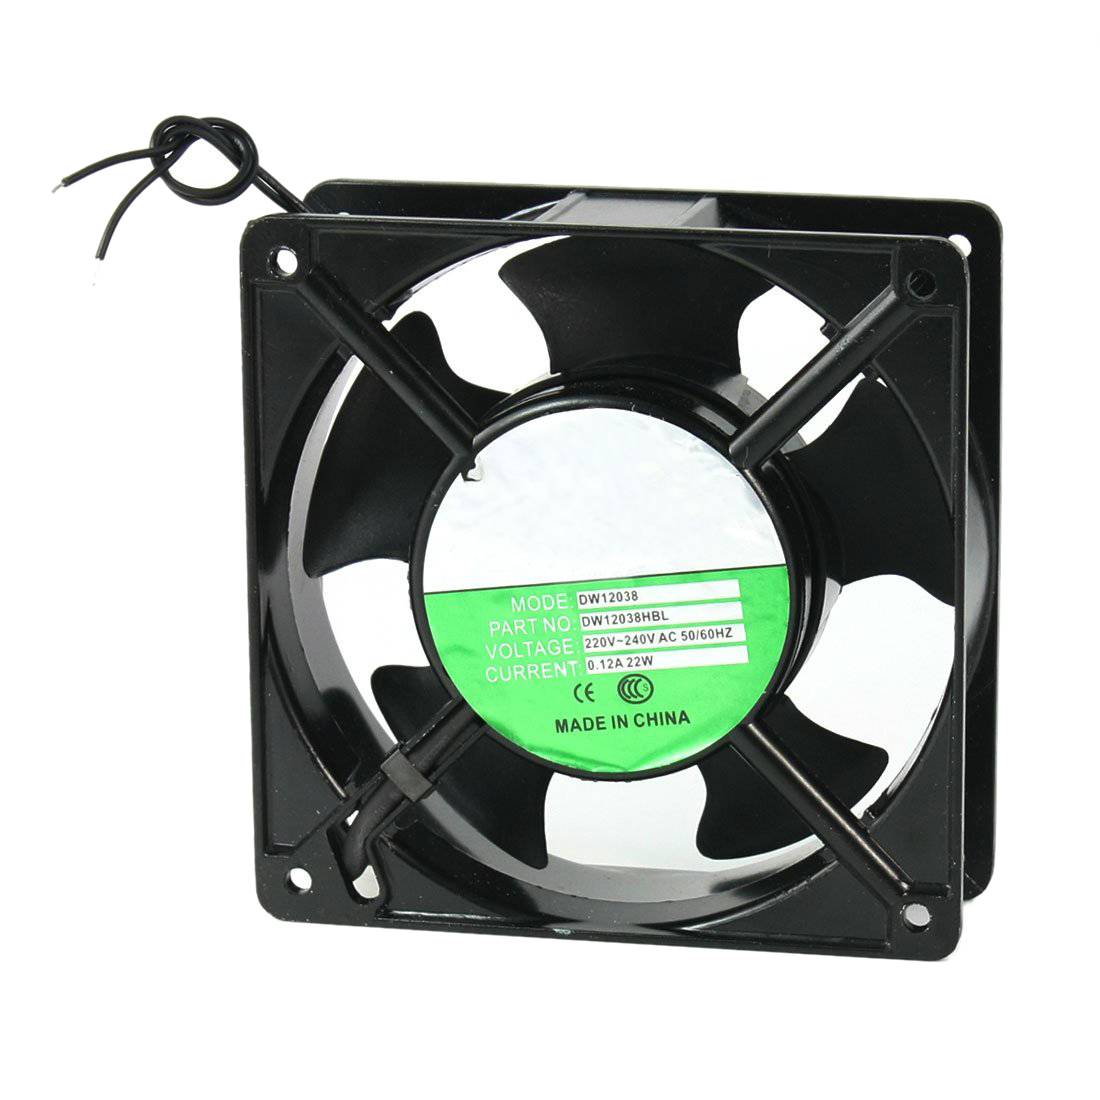 1x1x38mm 5 Blades Metal Frame Axial Flow Cooling Fan AC 2/240V 0.12A 22W For Computer Case